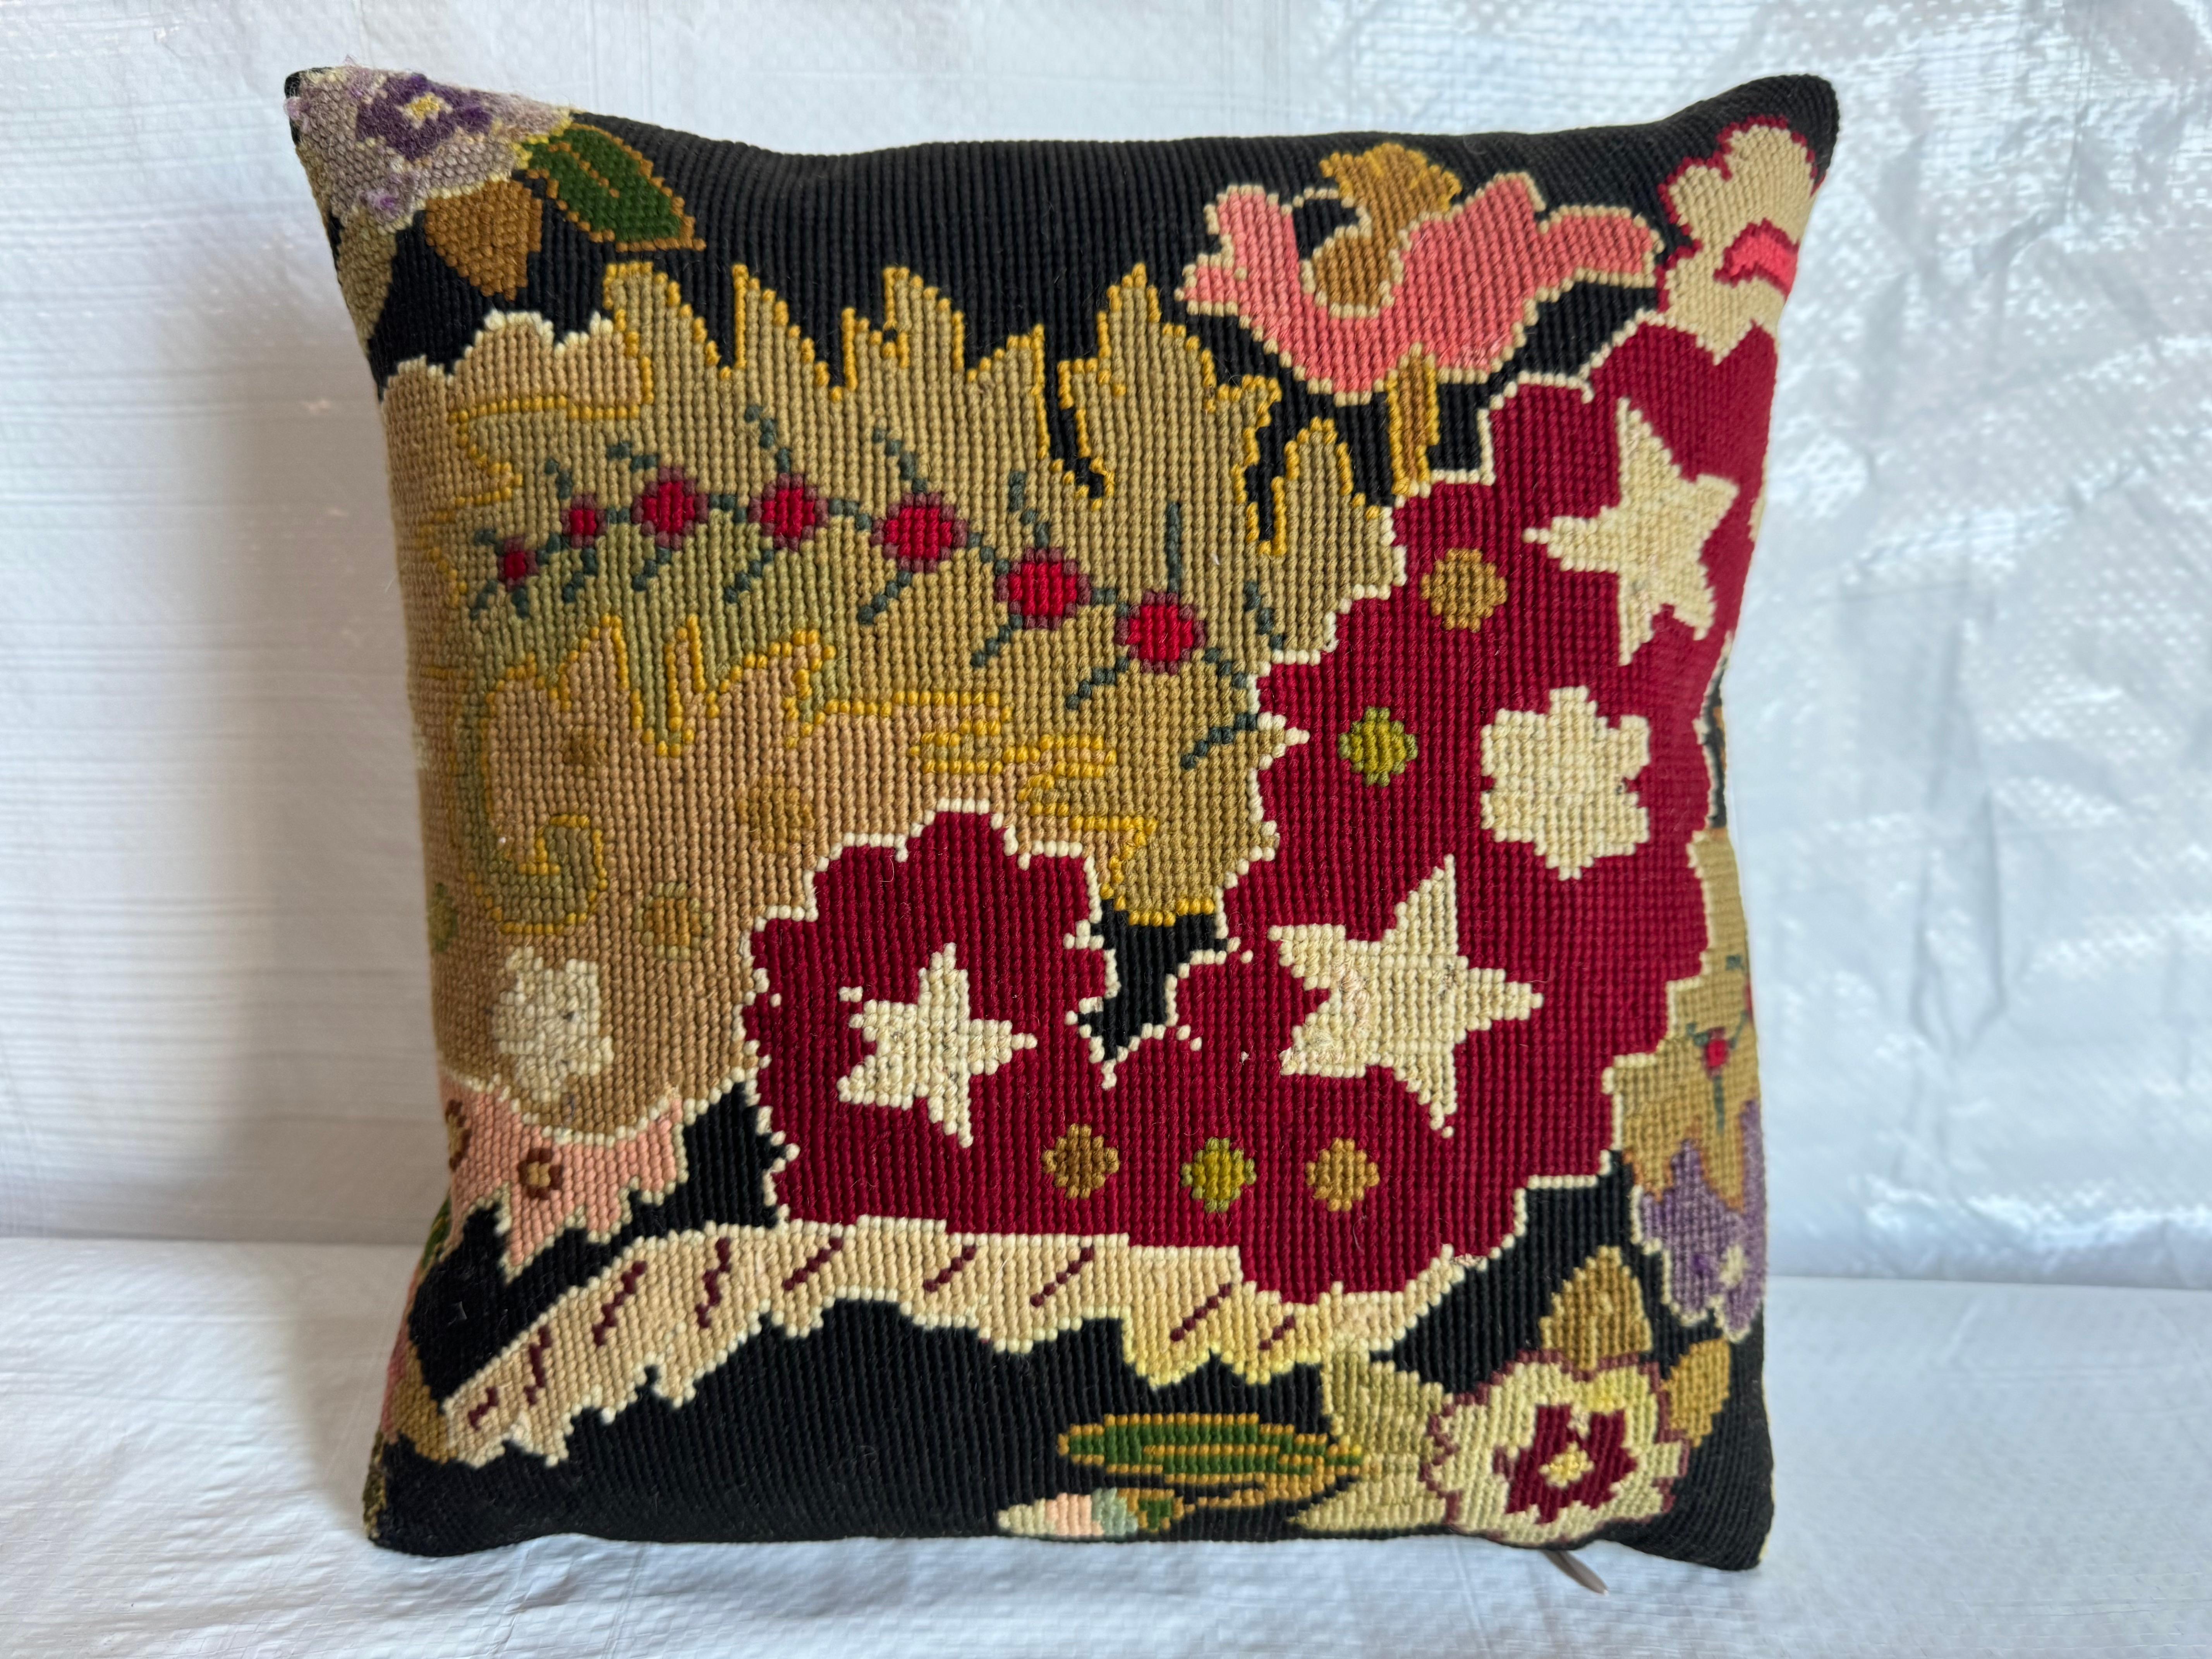 Indulge in elegance with the English Needlework Pillow, sized at 12 x 12. This finely crafted accent piece exudes timeless charm and intricate detailing for a touch of sophistication.